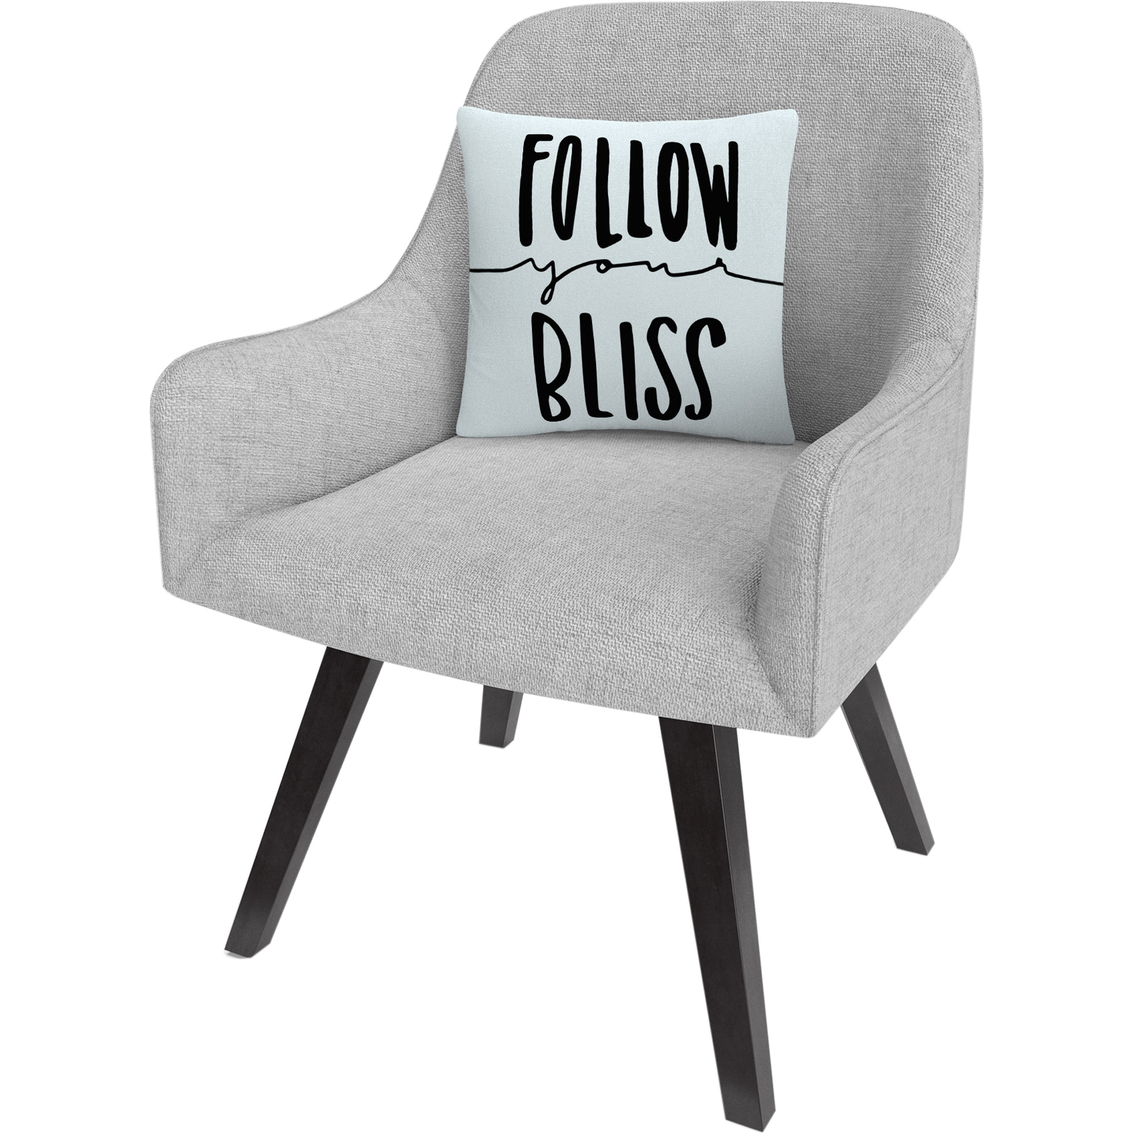 Trademark Fine Art Typographic Follow Your Bliss Decorative Throw Pillow - Image 3 of 3